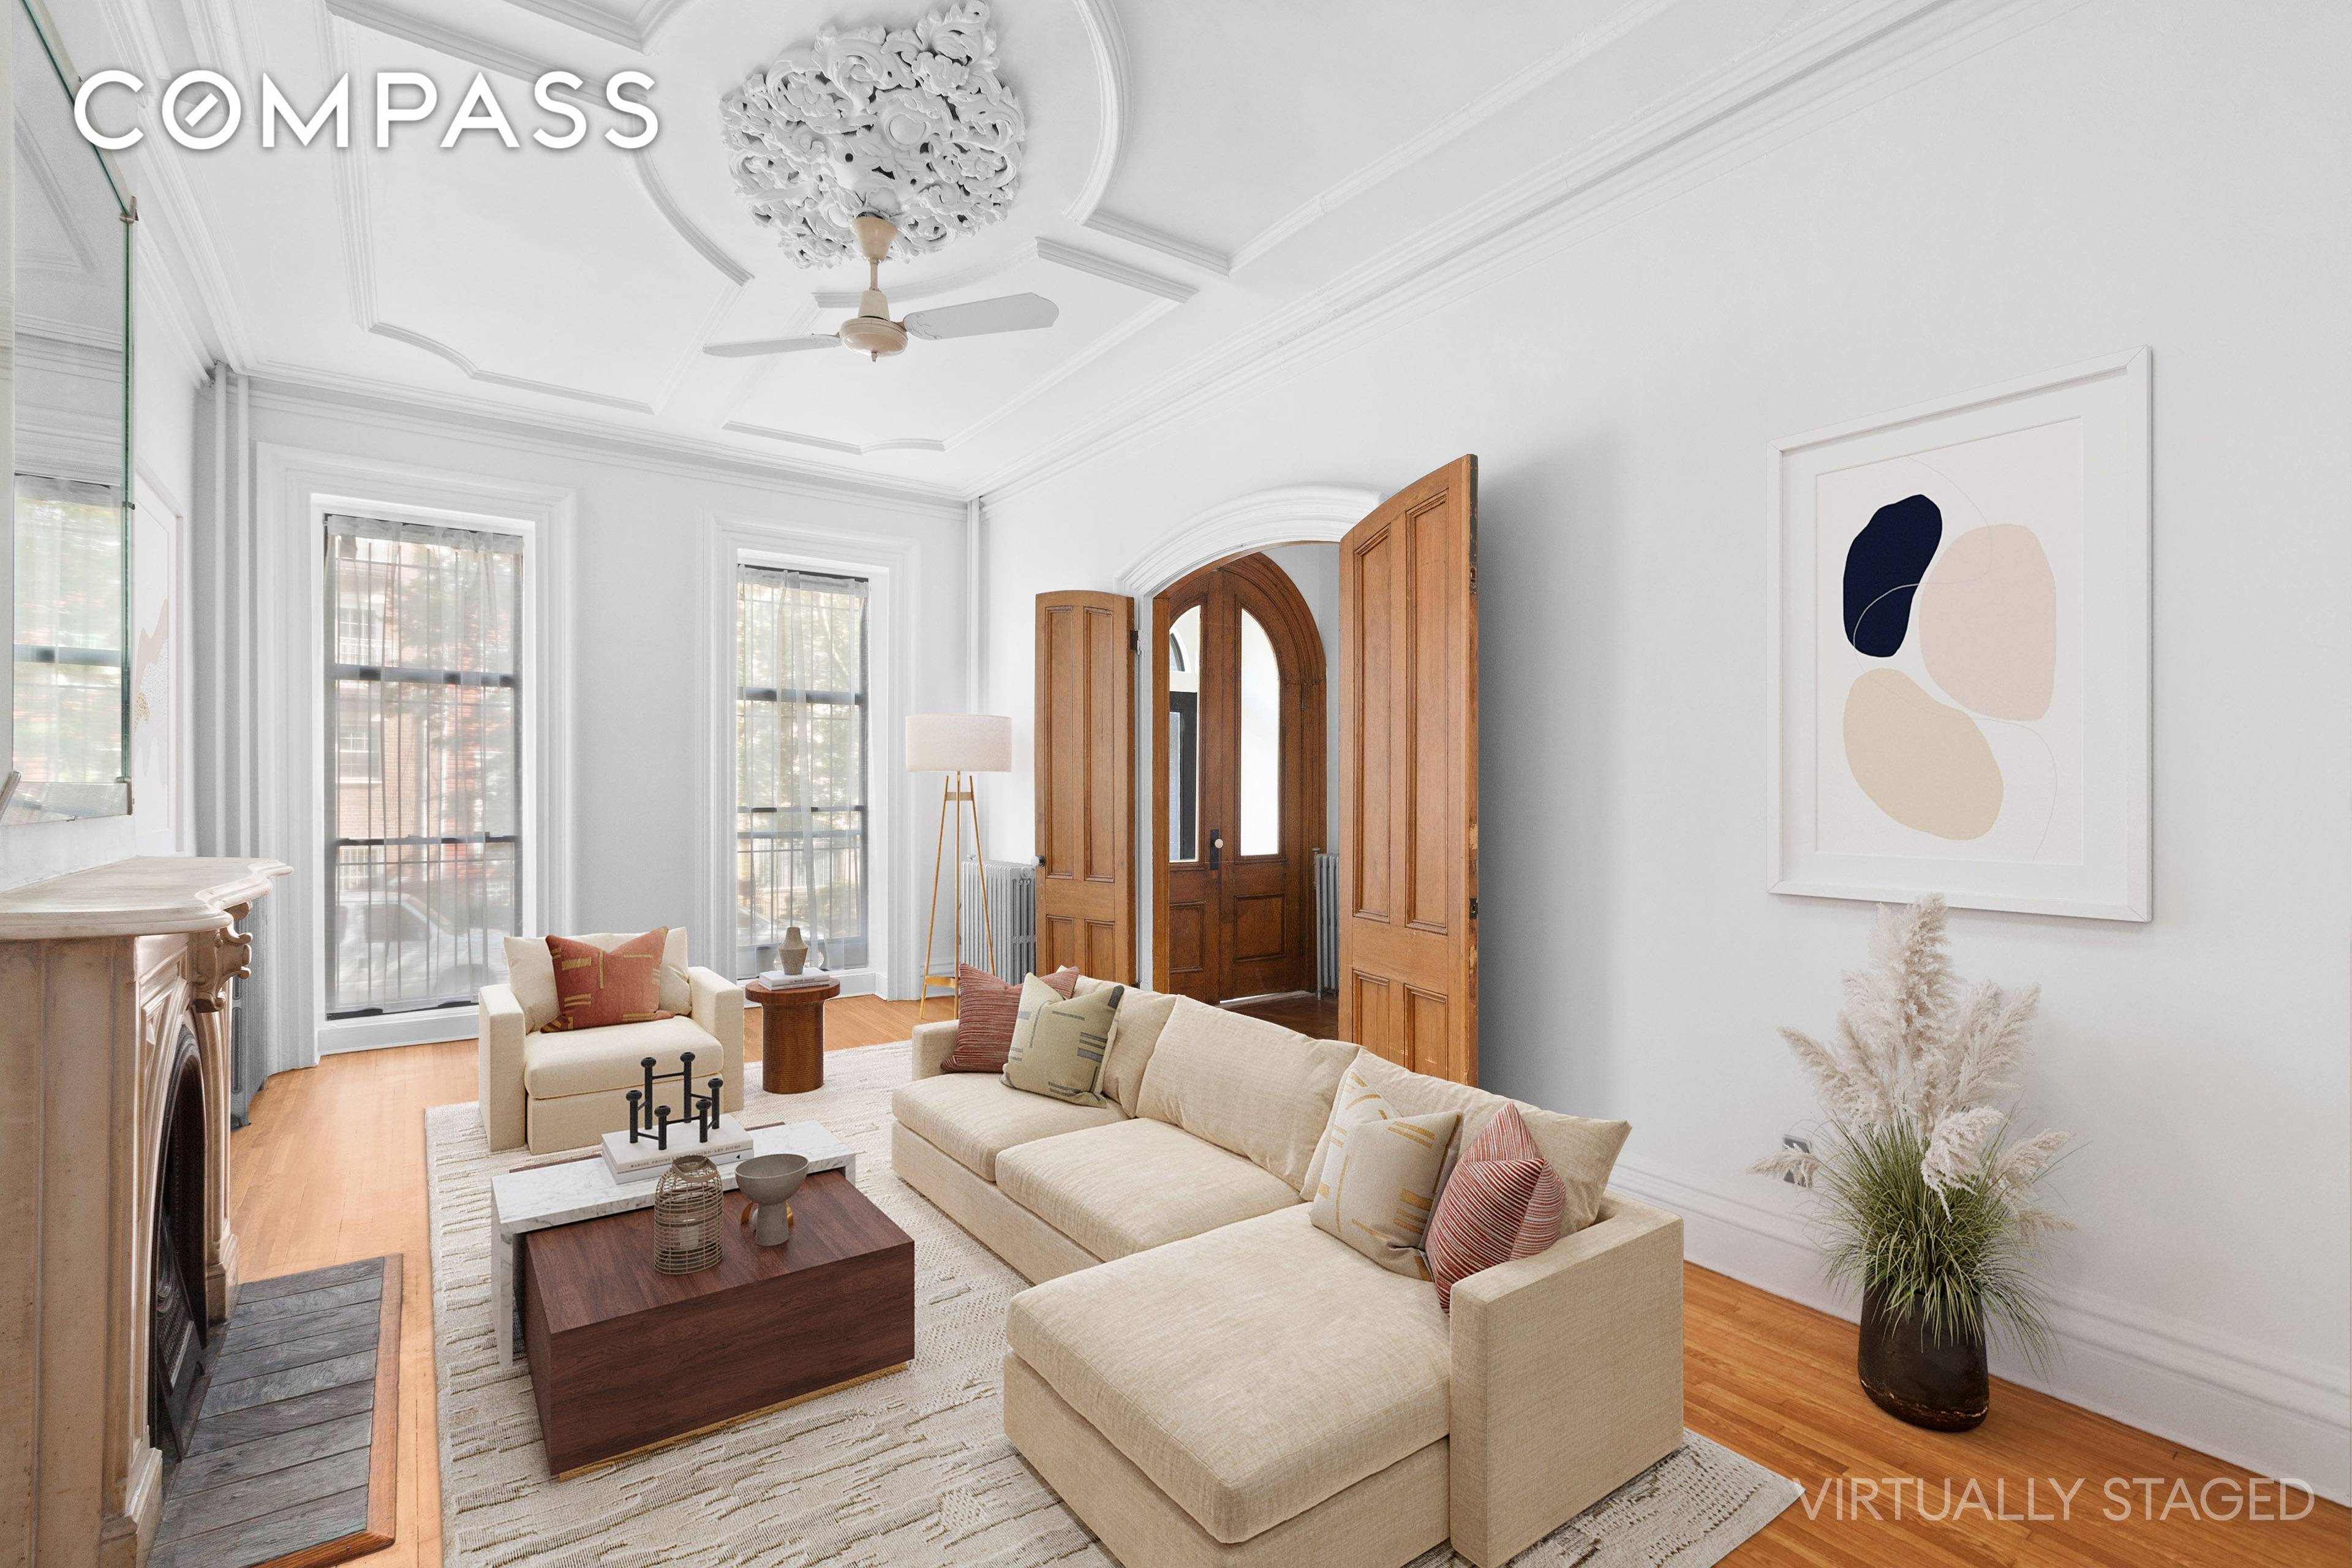 Housed in a circa 1860 s Italianate North Slope brick two family townhouse, this dashing upper triplex effortlessly blends period details with abundant space, light, and modern style and amenities.